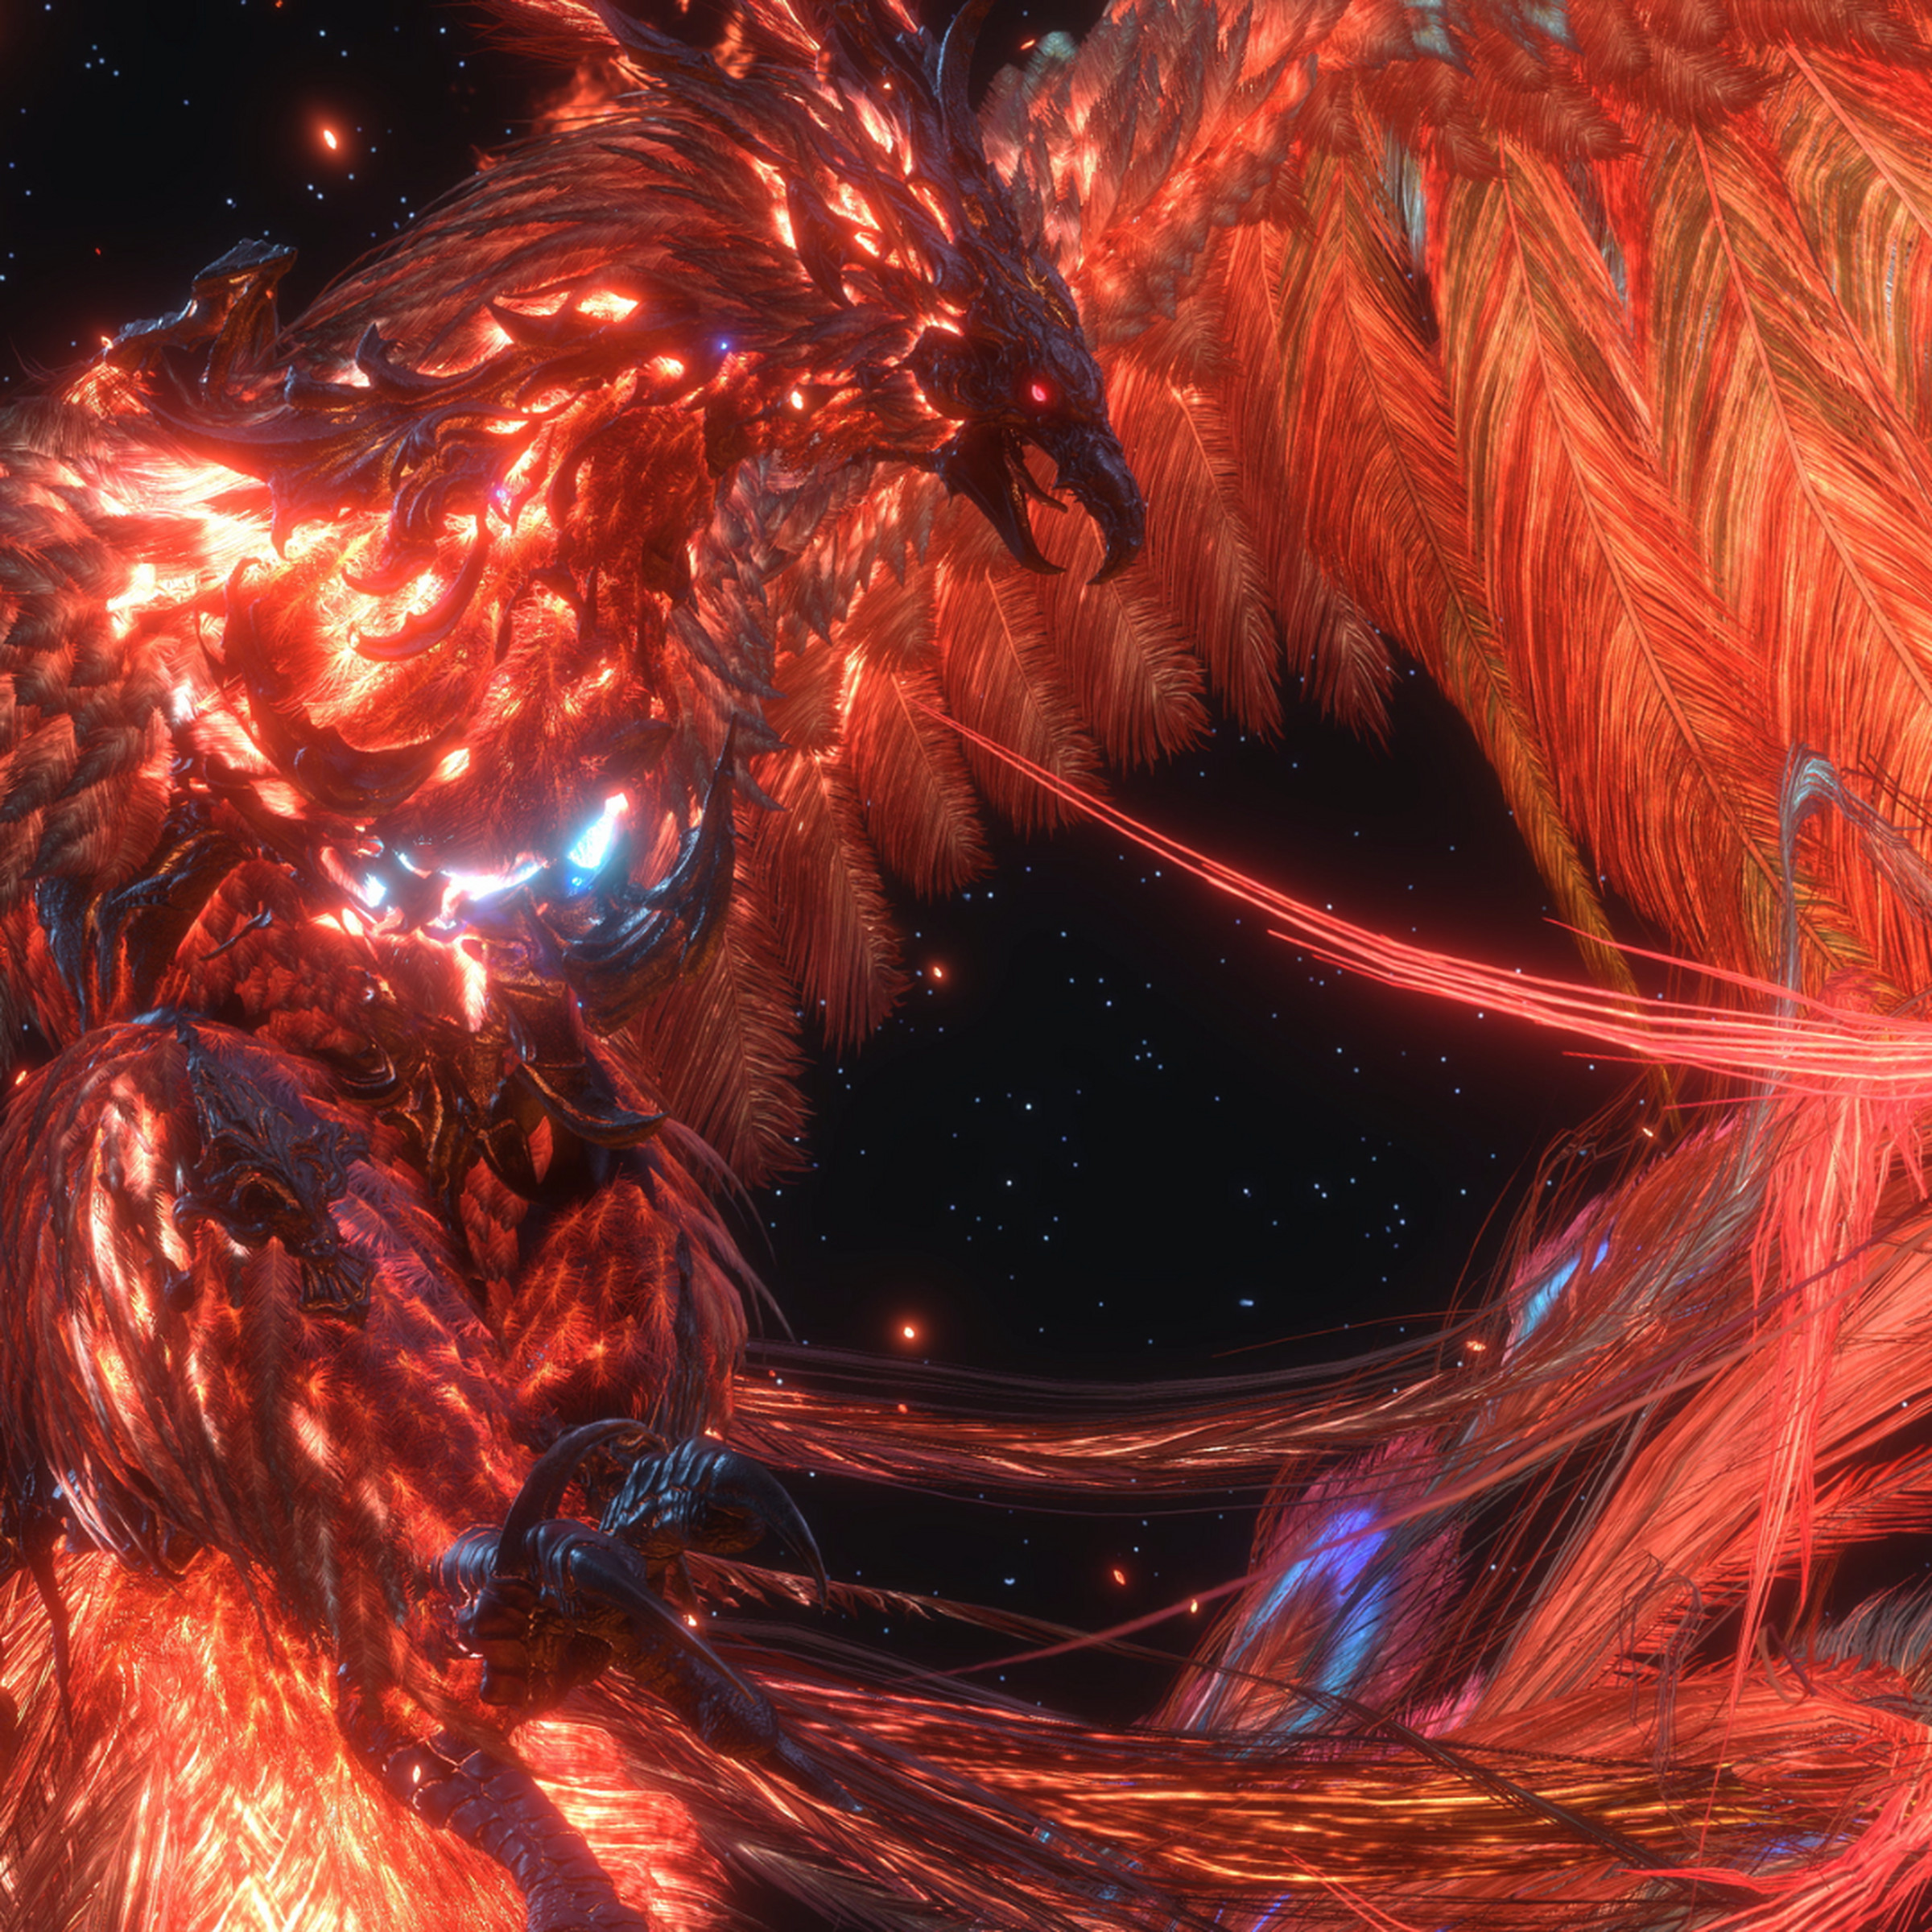 Image of the the Pheonix summon, a large firebird with stringy feathers wreathed in flames